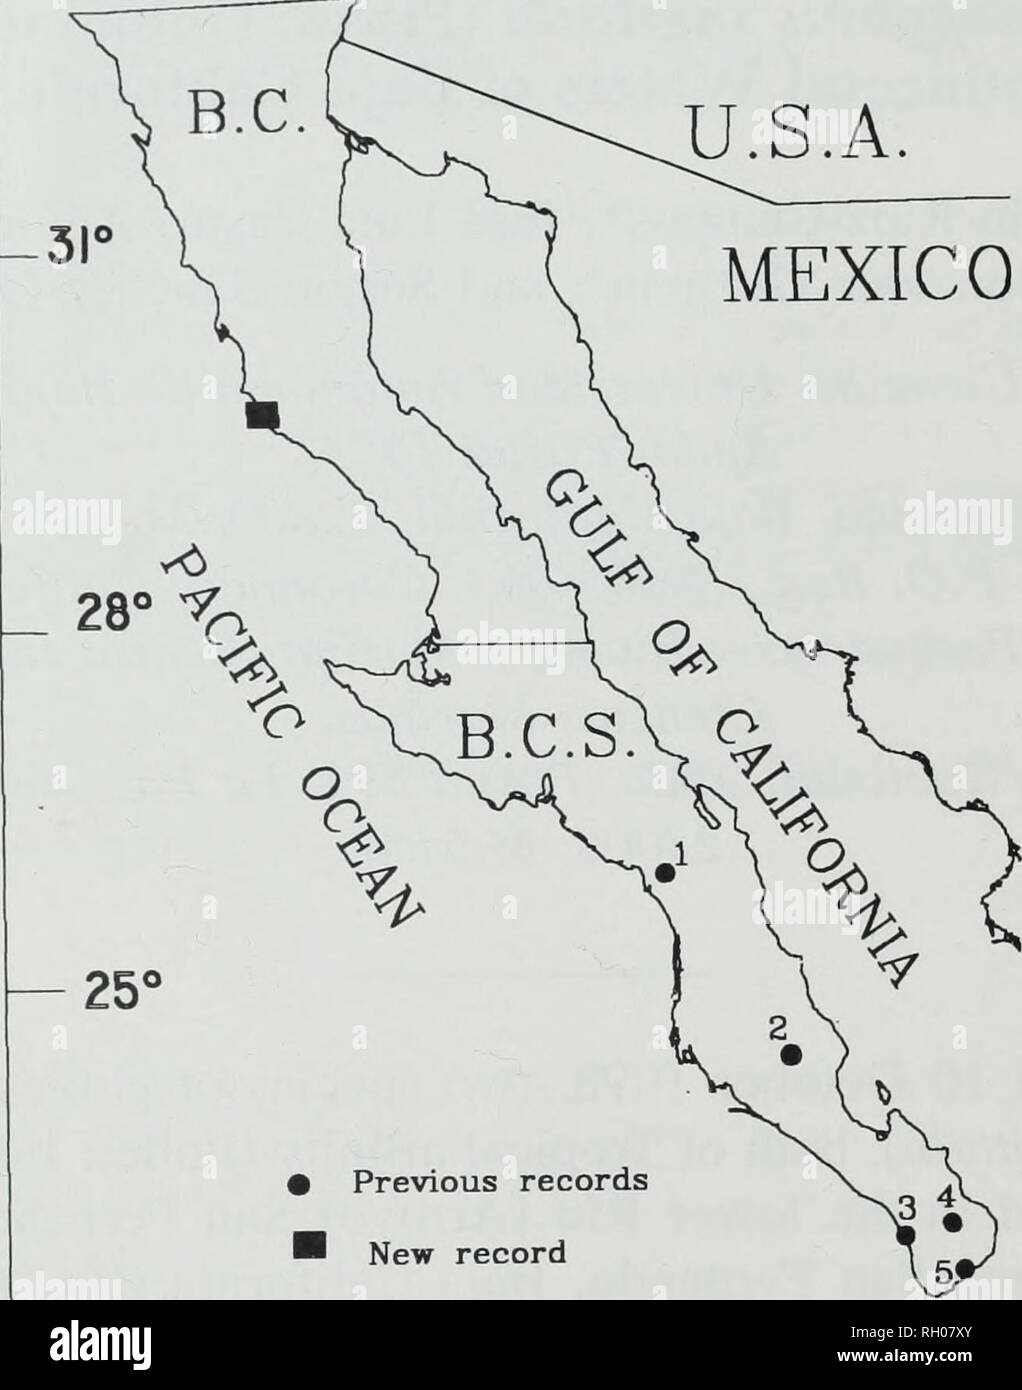 . Bulletin. Science. 132 SOUTHERN CALIFORNIA ACADEMY OF SCIENCES U.S.A. MEXICO. - 22° 117° • Previous records I New record II4C 110' Fig. 1. Previous and new records of Axvaous tajasica (Pisces: Gobiidae) in the peninsula of Baja California, Mexico. (1) Arroyo La Purfsima at town of La Purfsima, (2) Arroyo Las Pocitas at Pozas del Vado, (3) lower Arroyo Grande ca. Todos Santos, (4) Boca de la Sierra at Santiago, and (5) lower Rio San Jose del Cabo at San Jose del Cabo. de la Sierra at Santiago&quot; [stream of] (De Buen 1942); Rio San Jose del Cabo [lower part] (Follett 1960; Castro-Aguirre, 1 Stock Photo